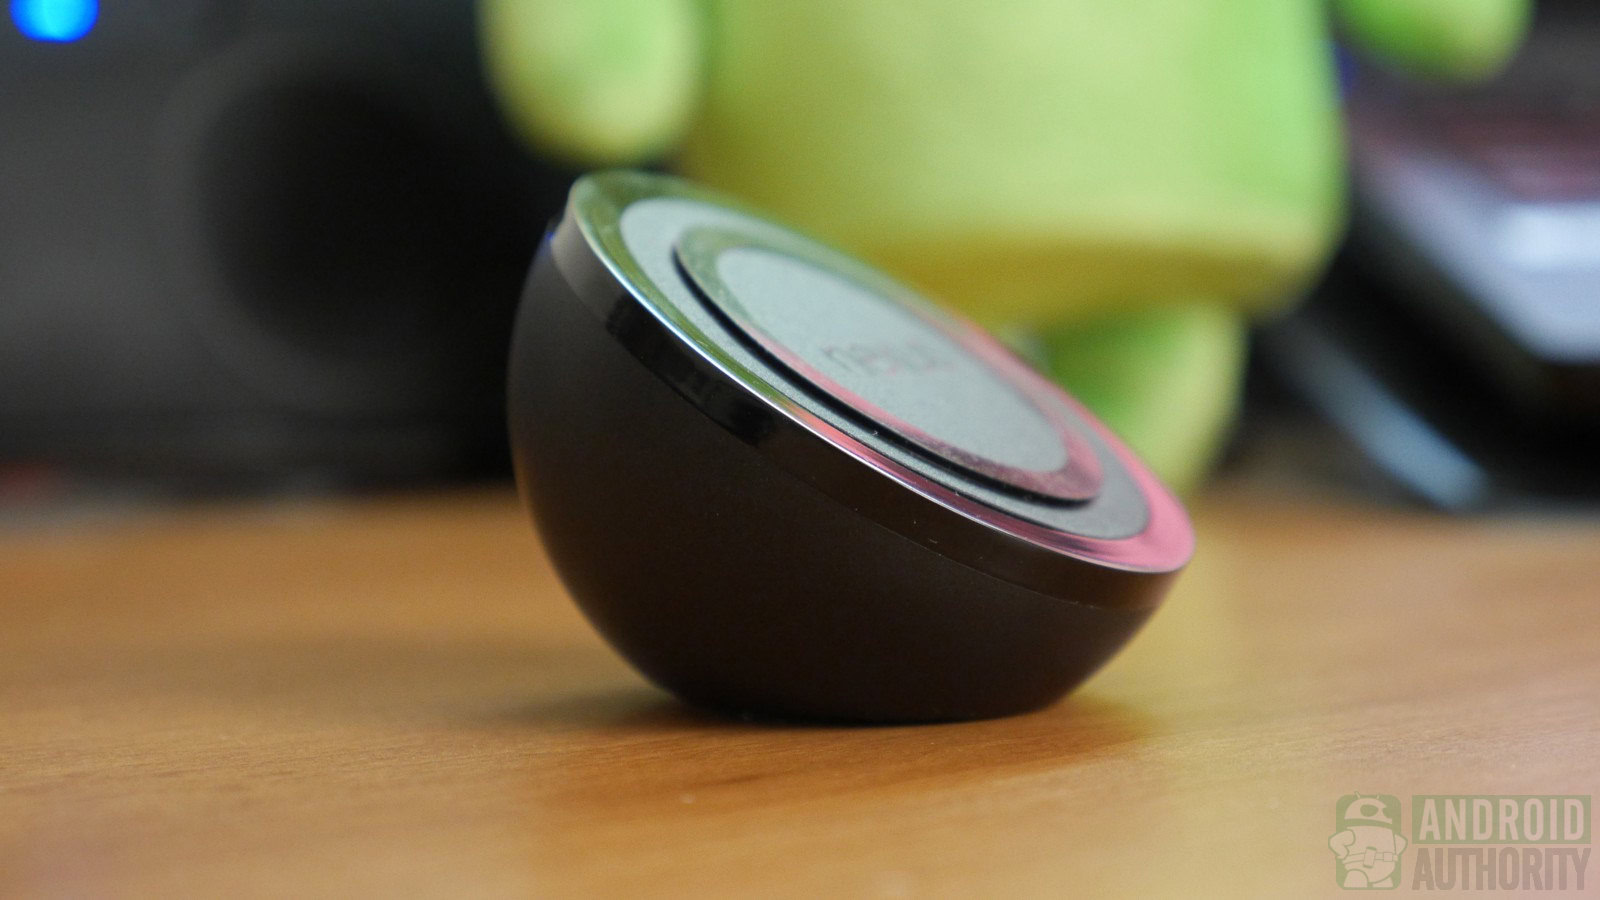 The wireless charger for the the Nexus 5 is coming, and soon. 